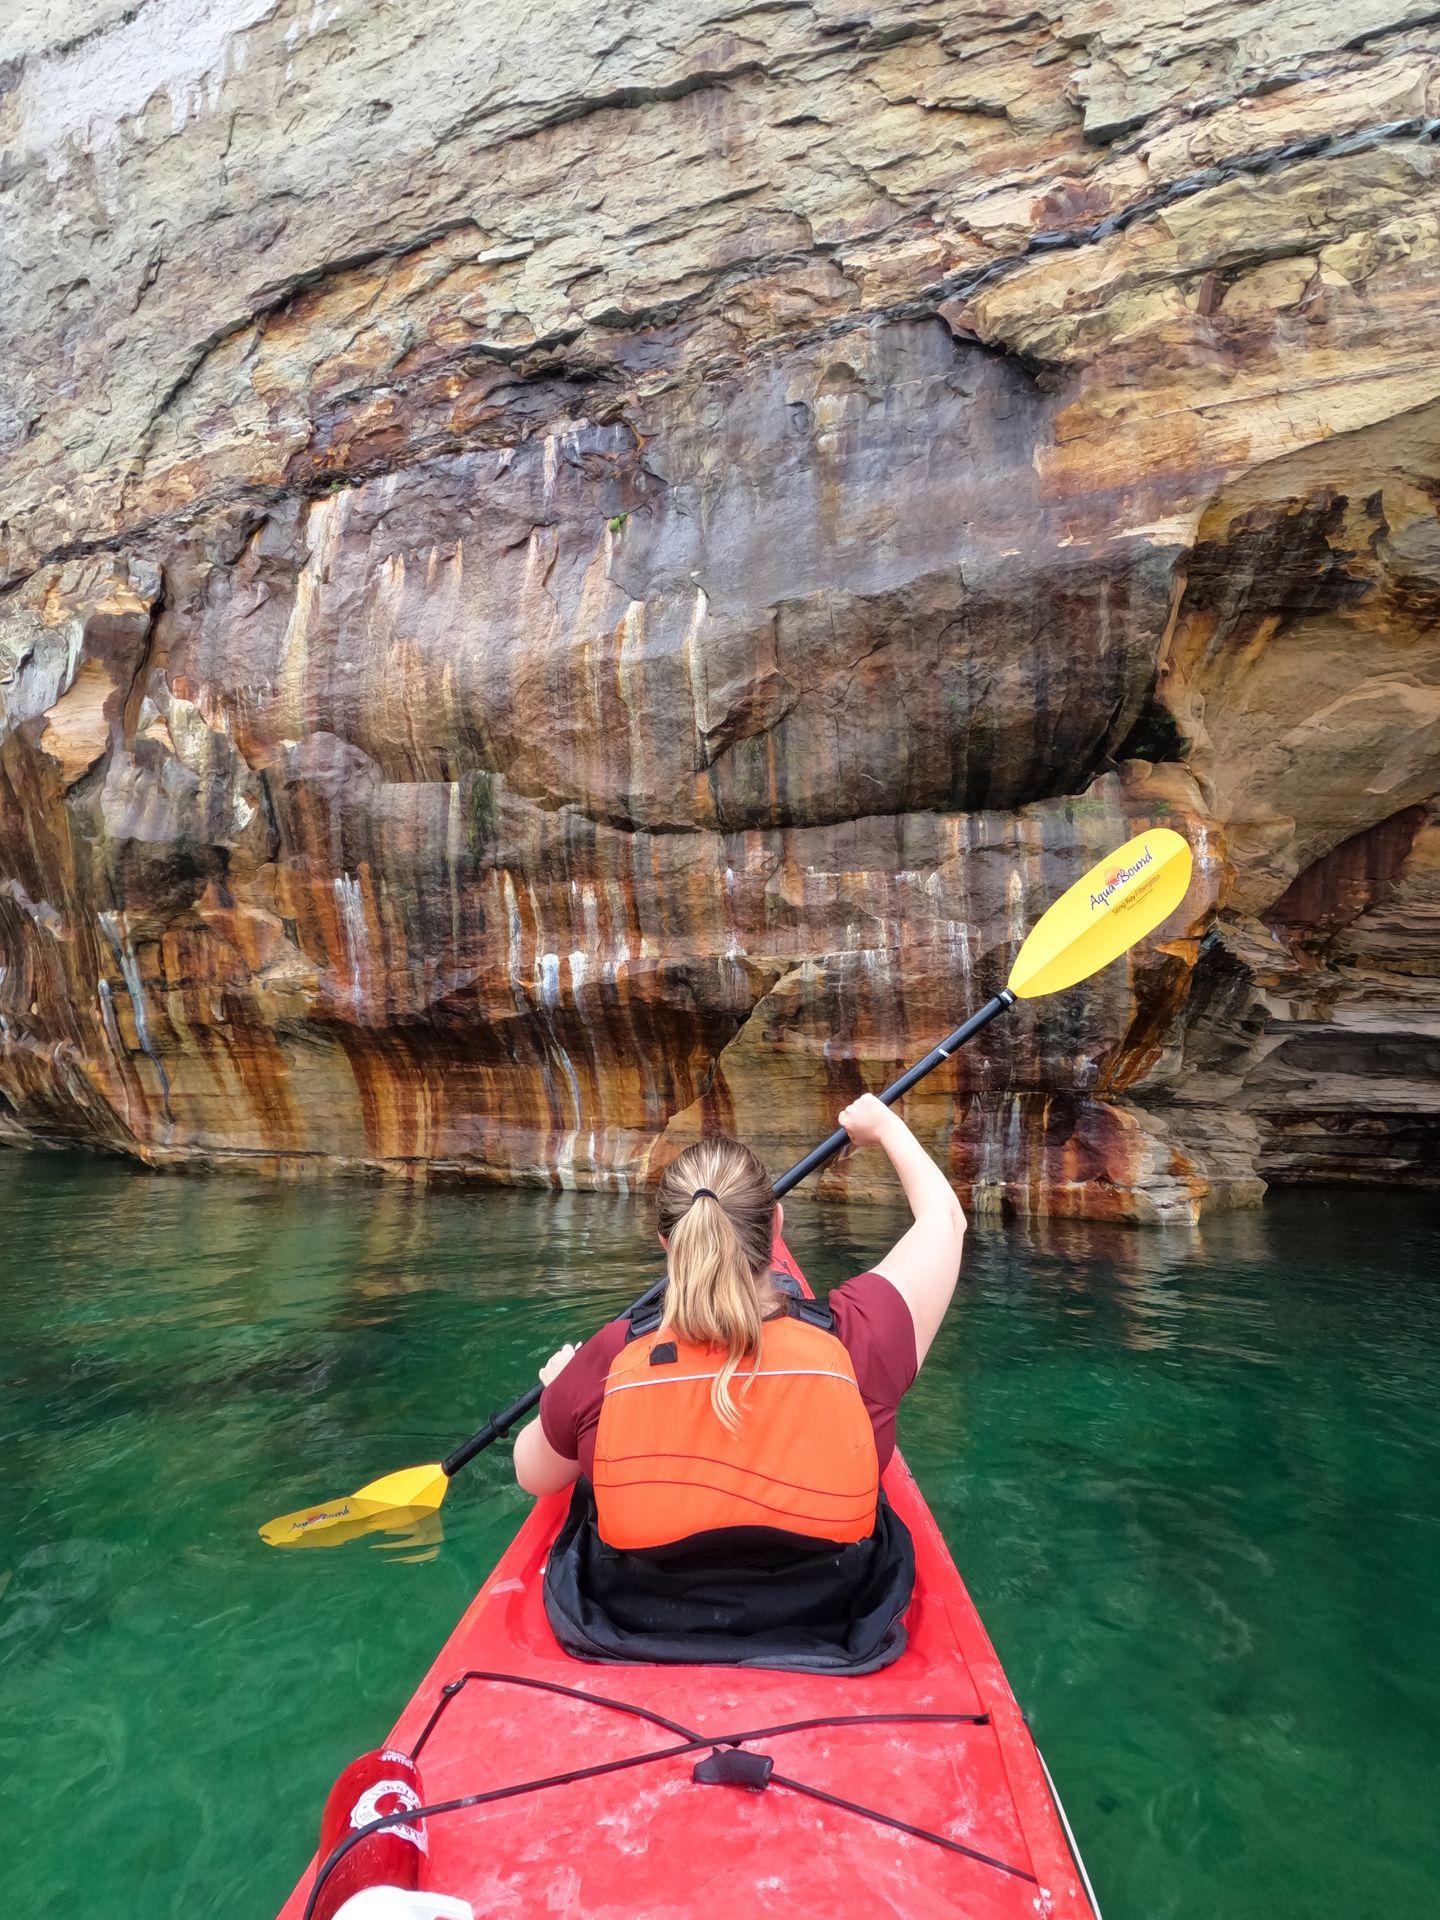 Lydia kayaking towards a wall that looks as if it is painted